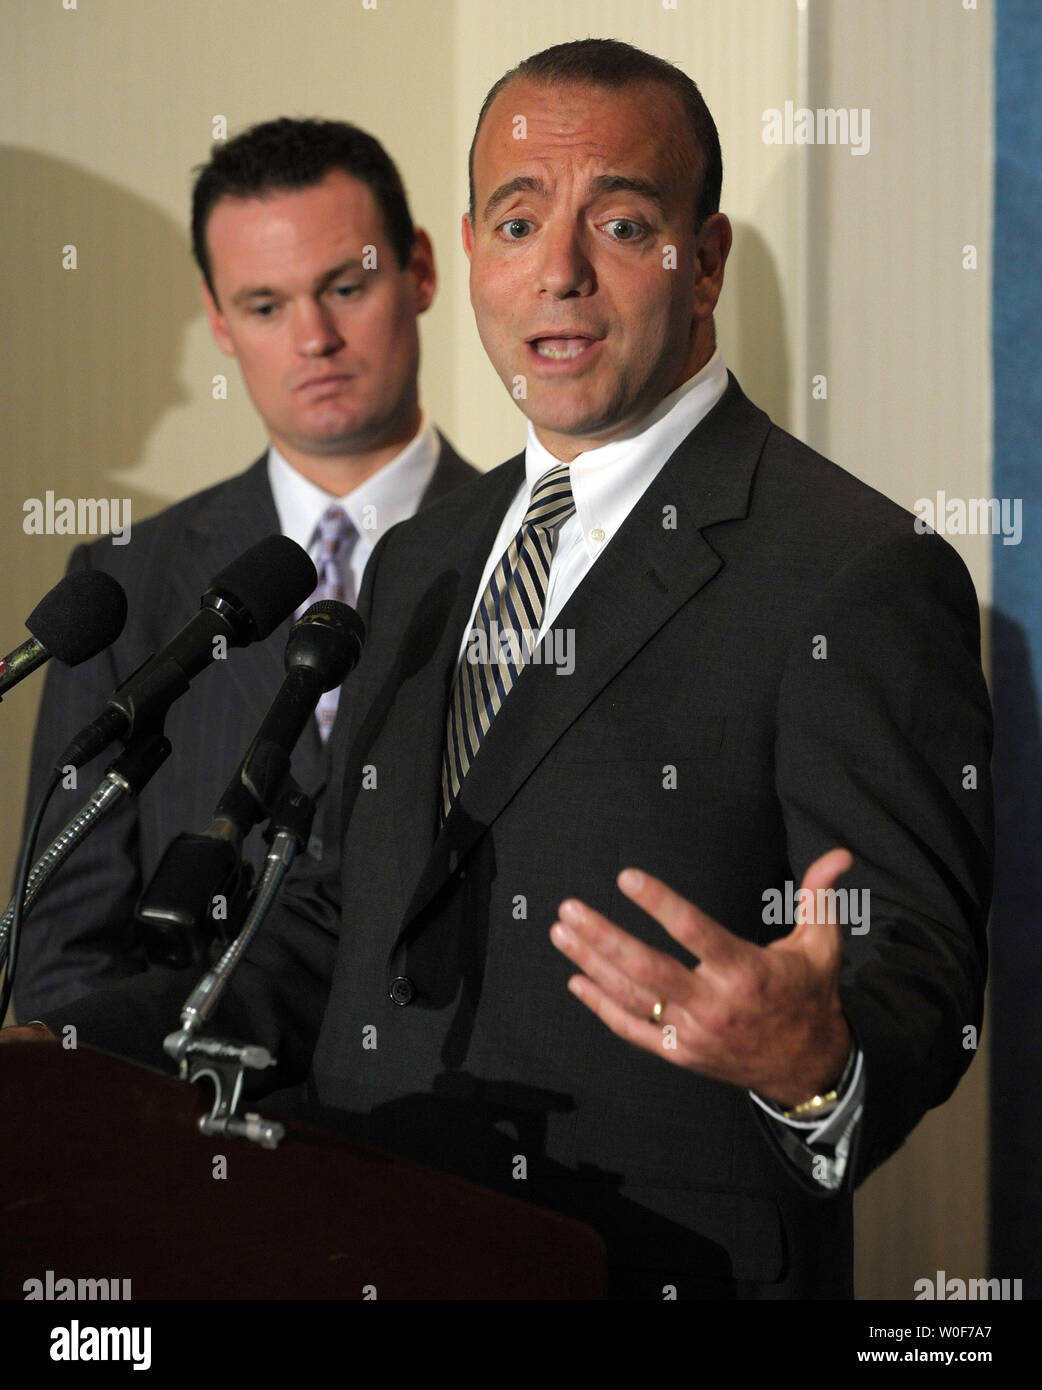 Pittsburgh Mayor Luke Ravenstahl and Allegheny County Executive Dan Onorato (L to R) participate in a news conference to discuss the G20 summit which Pittsburgh is hosting in Washington on September 9, 2009.    UPI/Roger L. Wollenberg Stock Photo